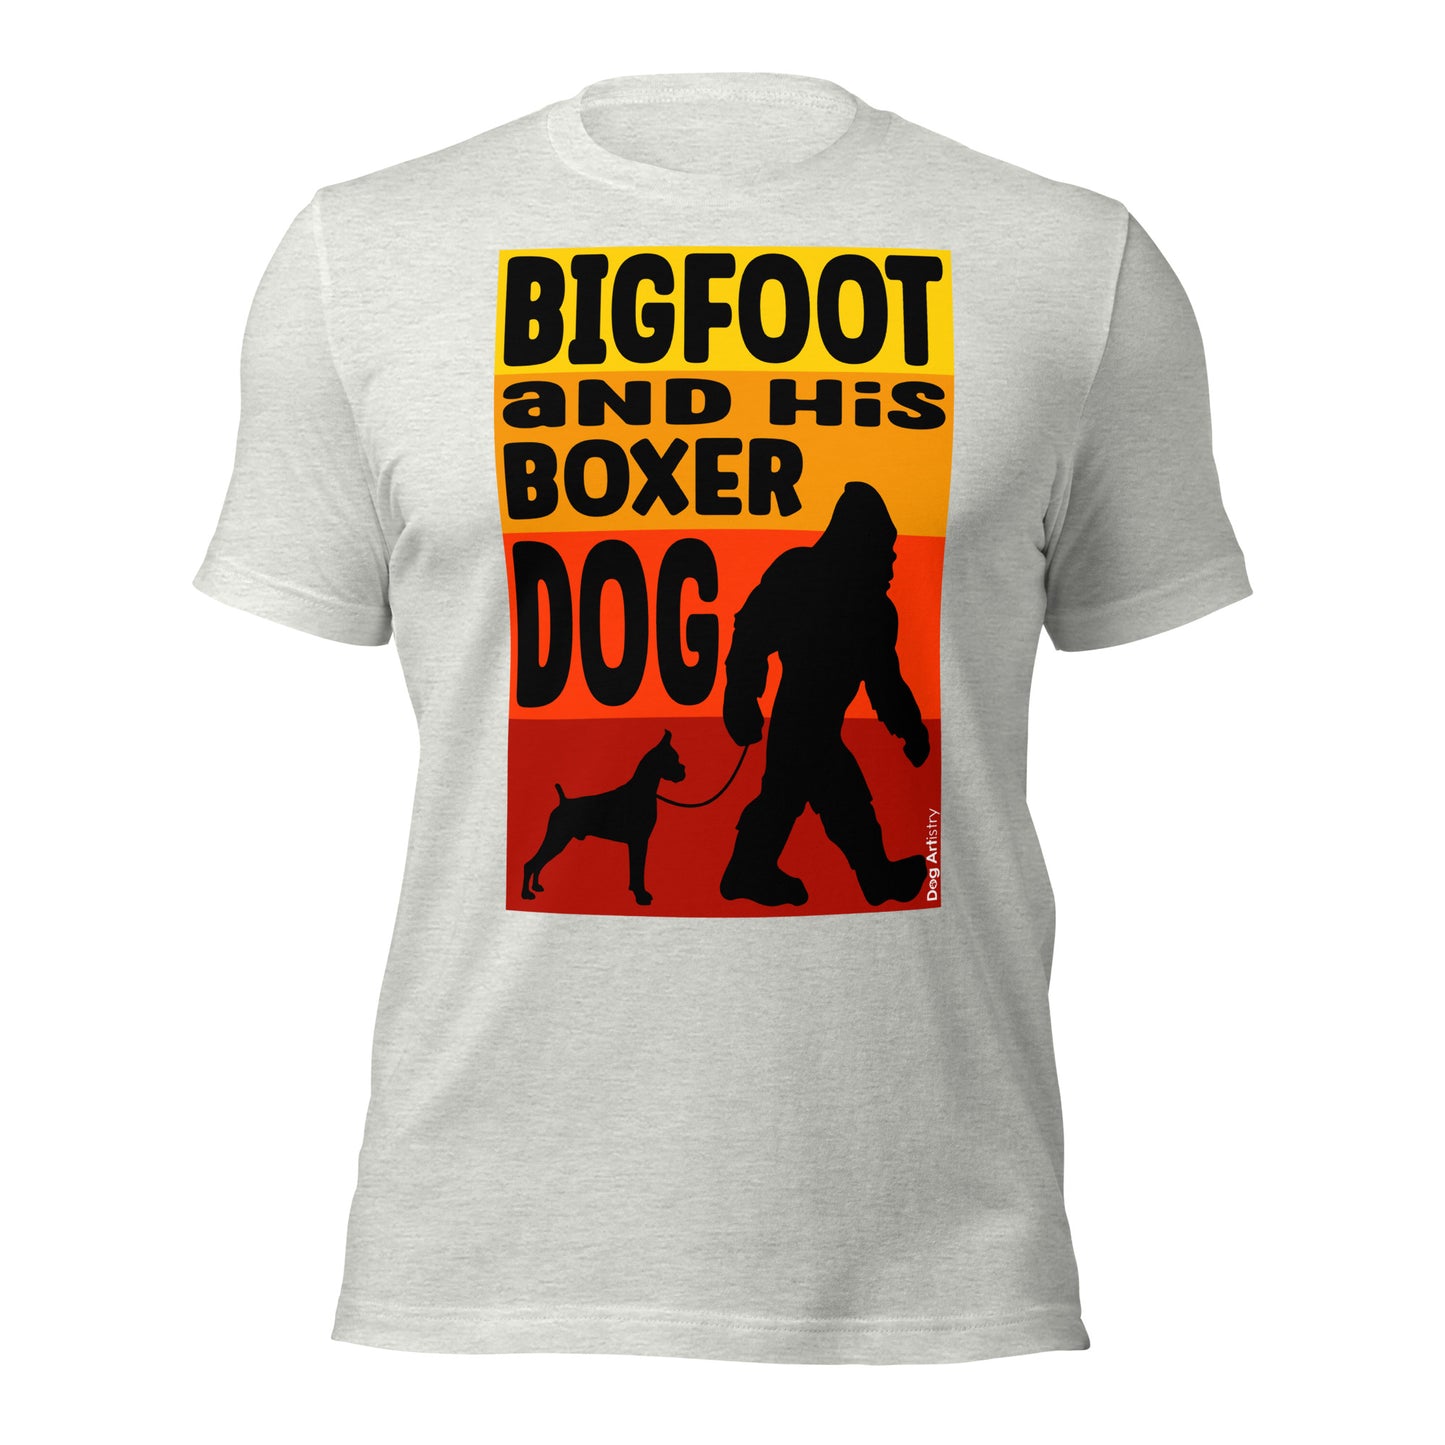 Big foot and his Boxer dog unisex ash t-shirt by Dog Artistry.